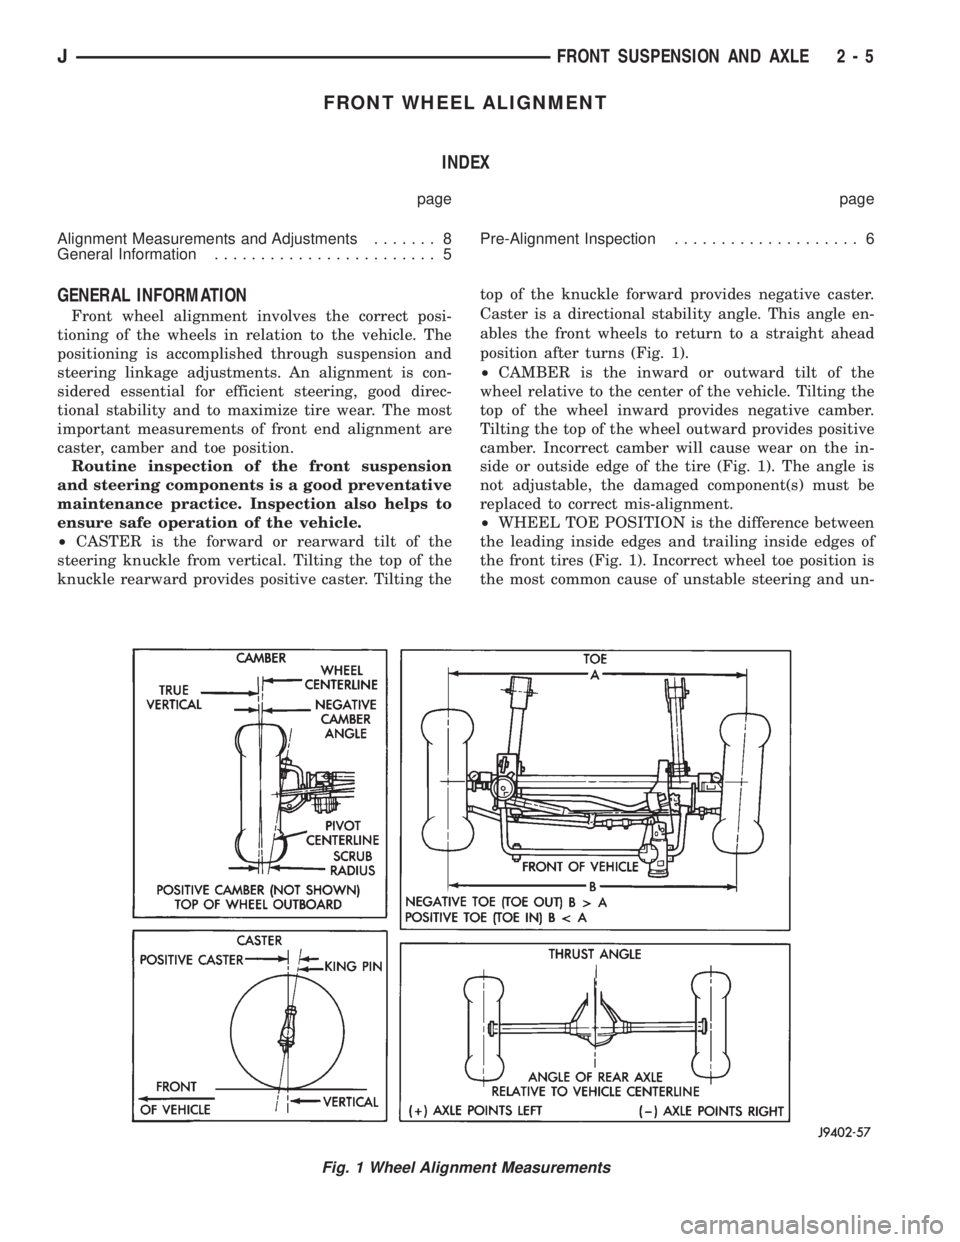 JEEP CHEROKEE 1995  Service Repair Manual FRONT WHEEL ALIGNMENT
INDEX
page page
Alignment Measurements and Adjustments....... 8
General Information........................ 5Pre-Alignment Inspection.................... 6
GENERAL INFORMATION
Fr